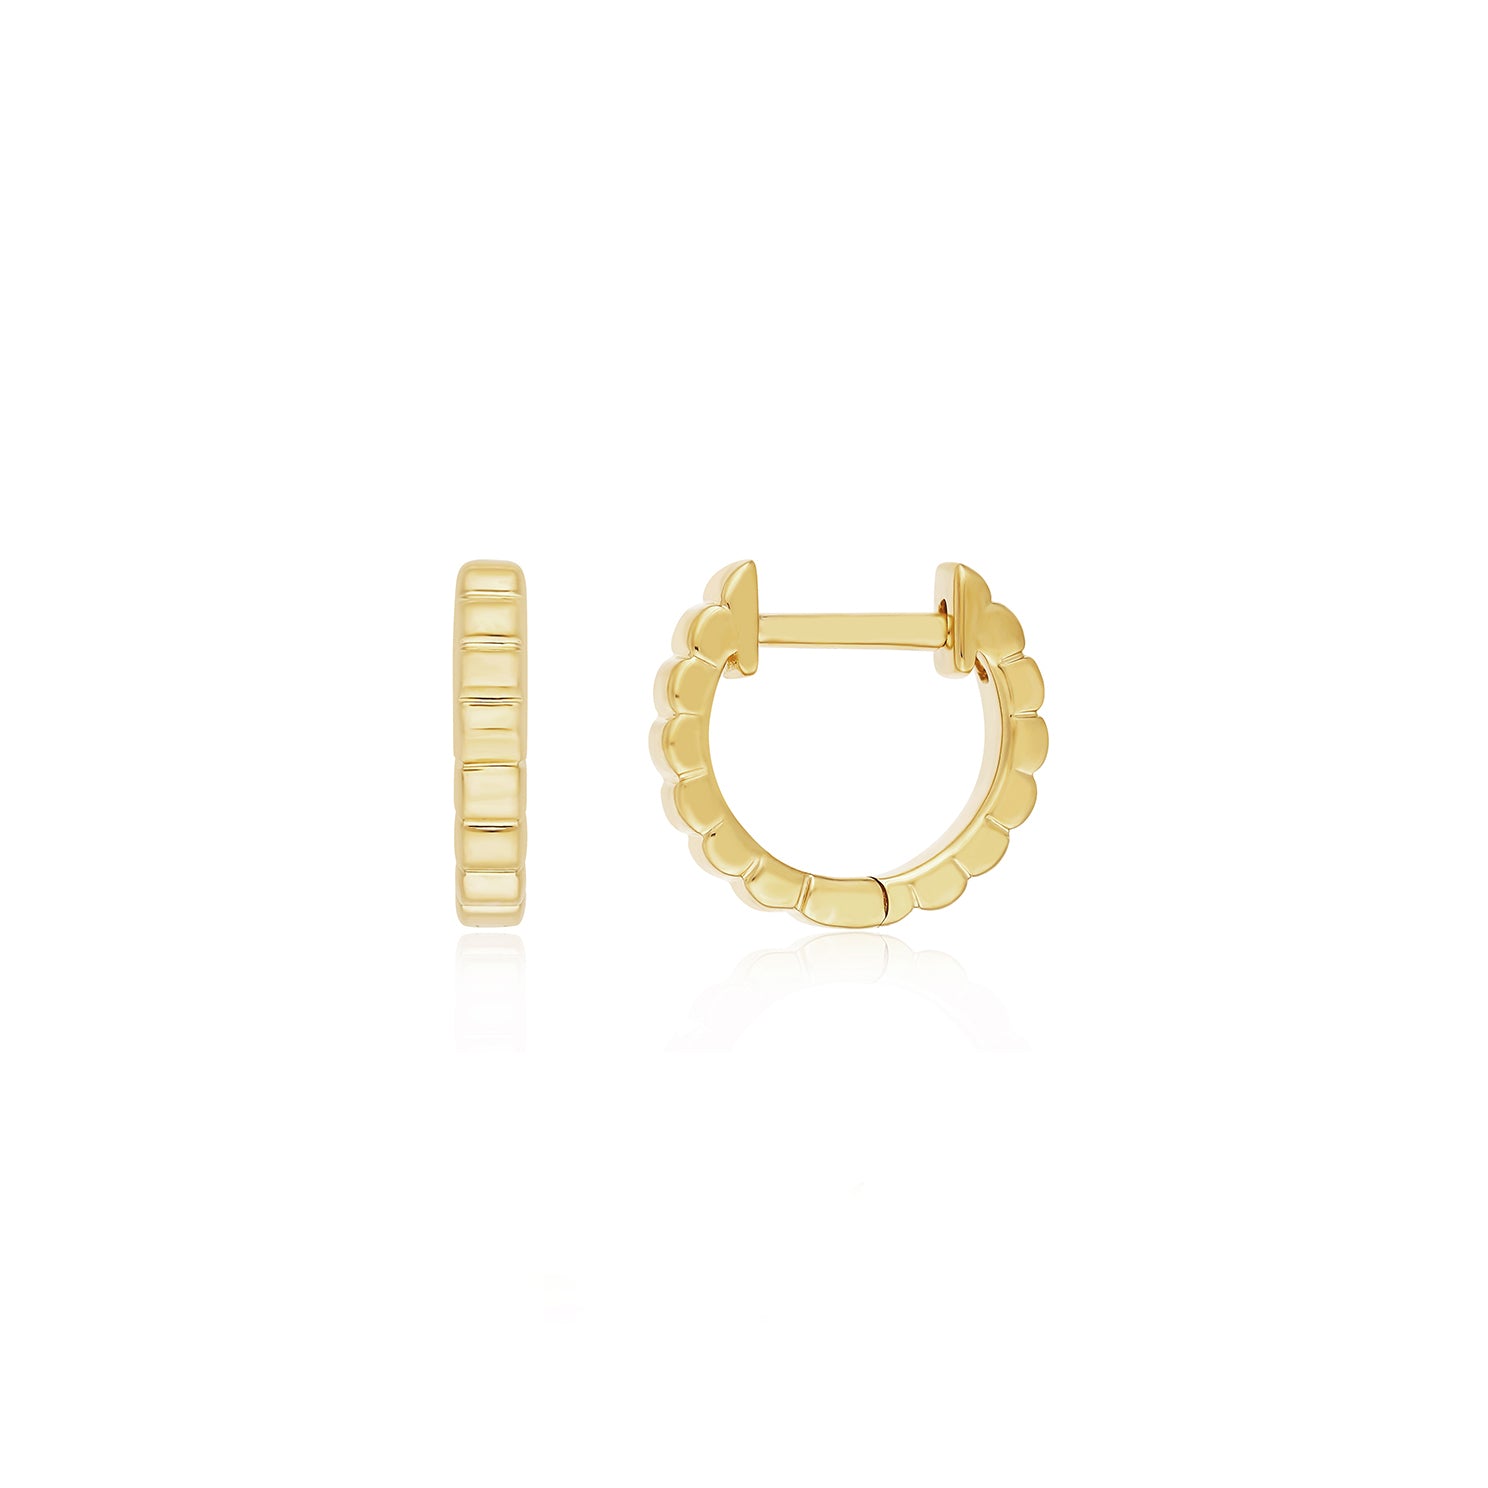 Gold Fluted Mini Huggie Earring in 14k yellow gold